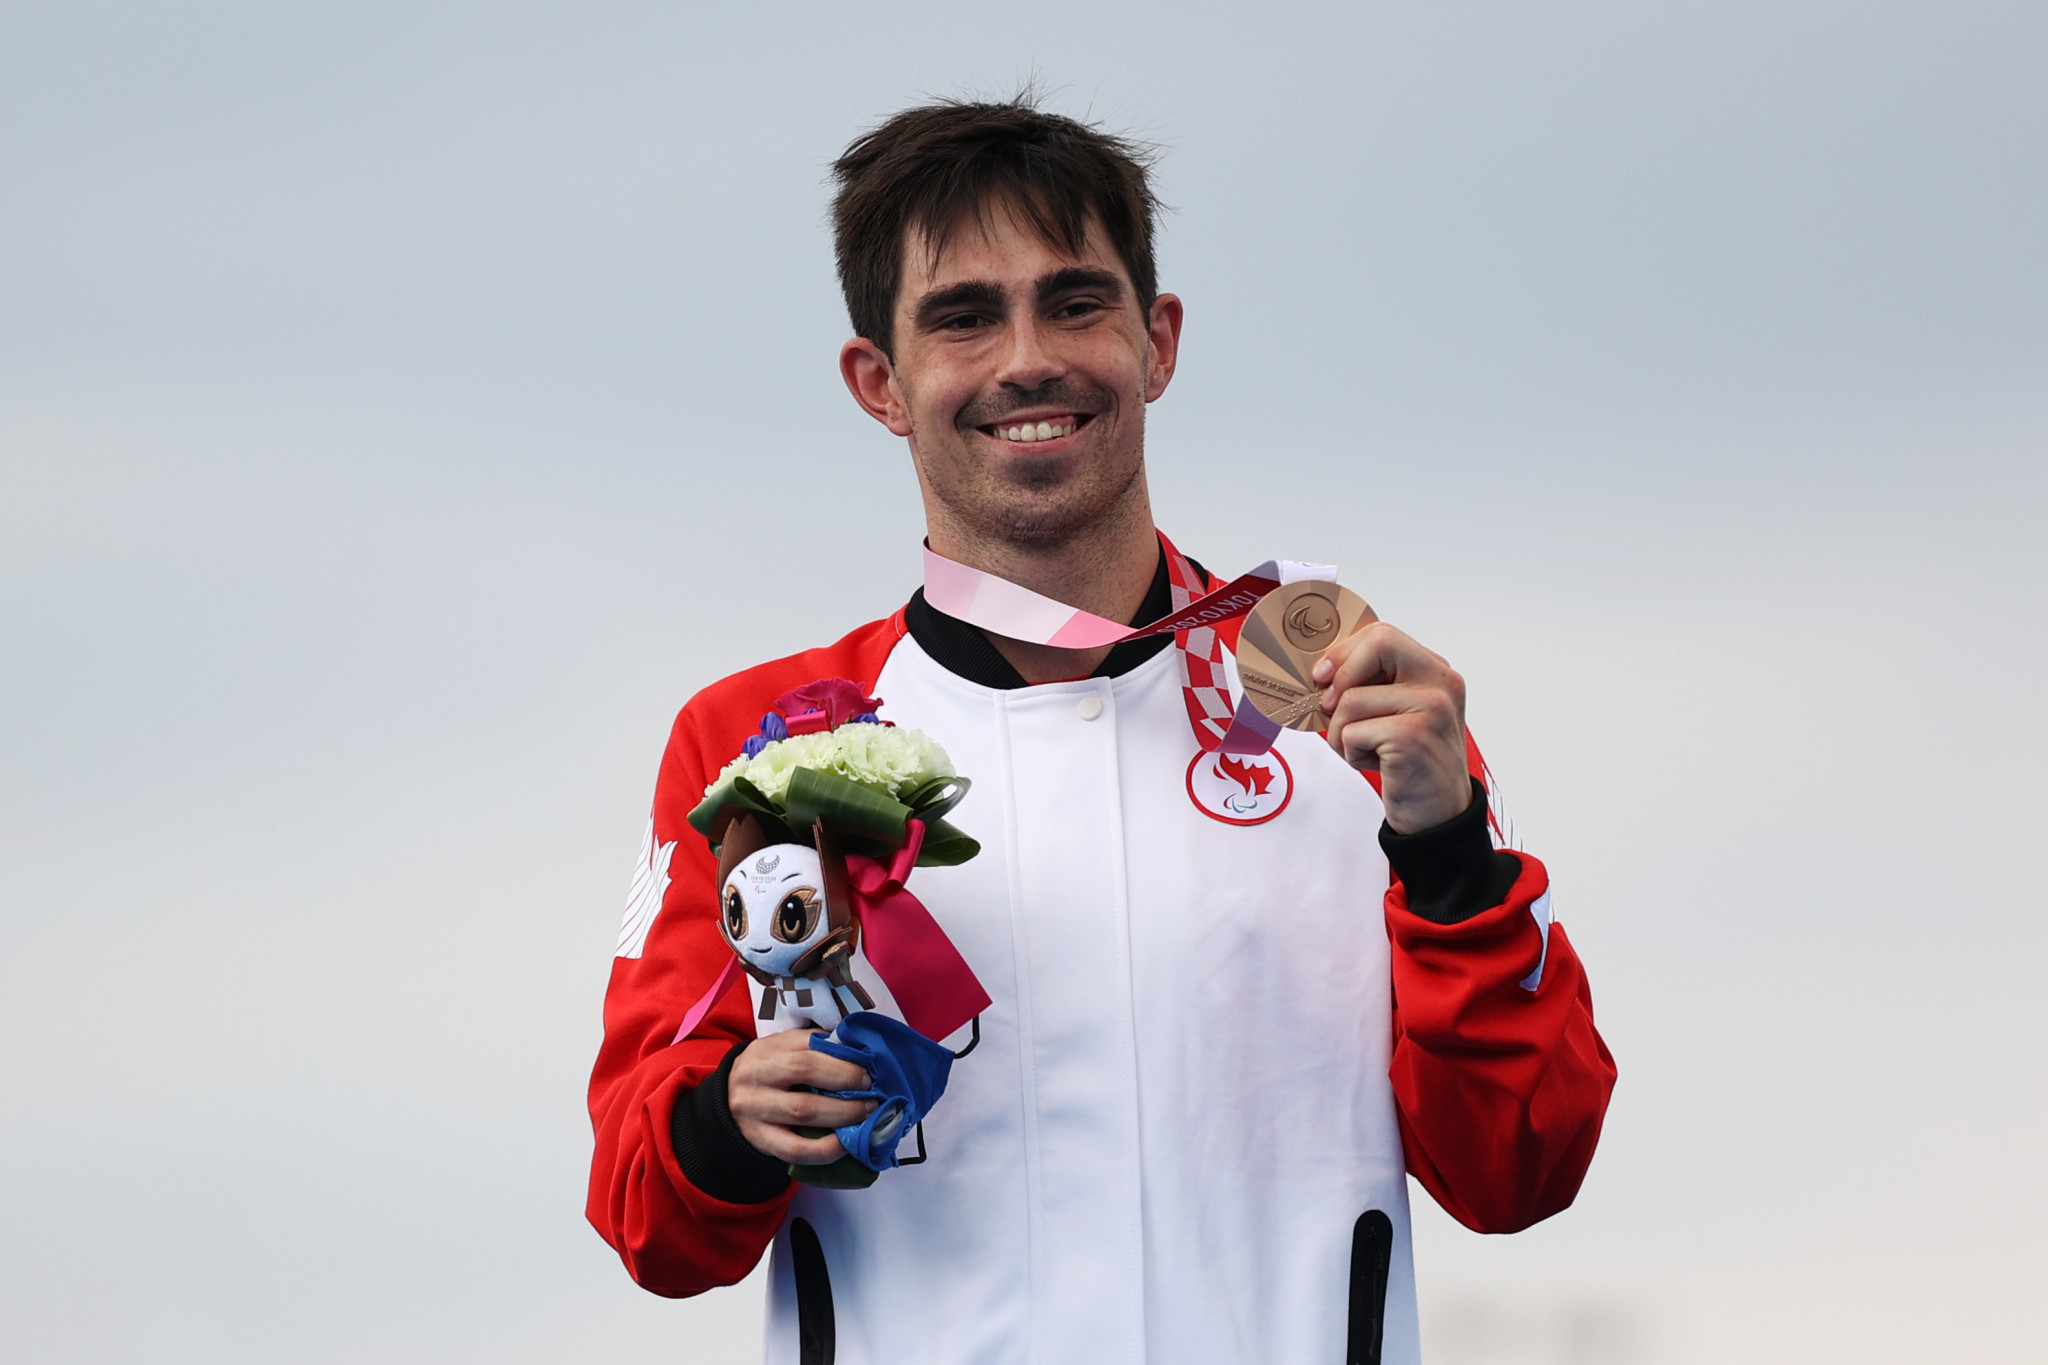 Stefan Daniel of Canada managed to secure bronze at the Tokyo 2020 Paralympics ©Getty Images